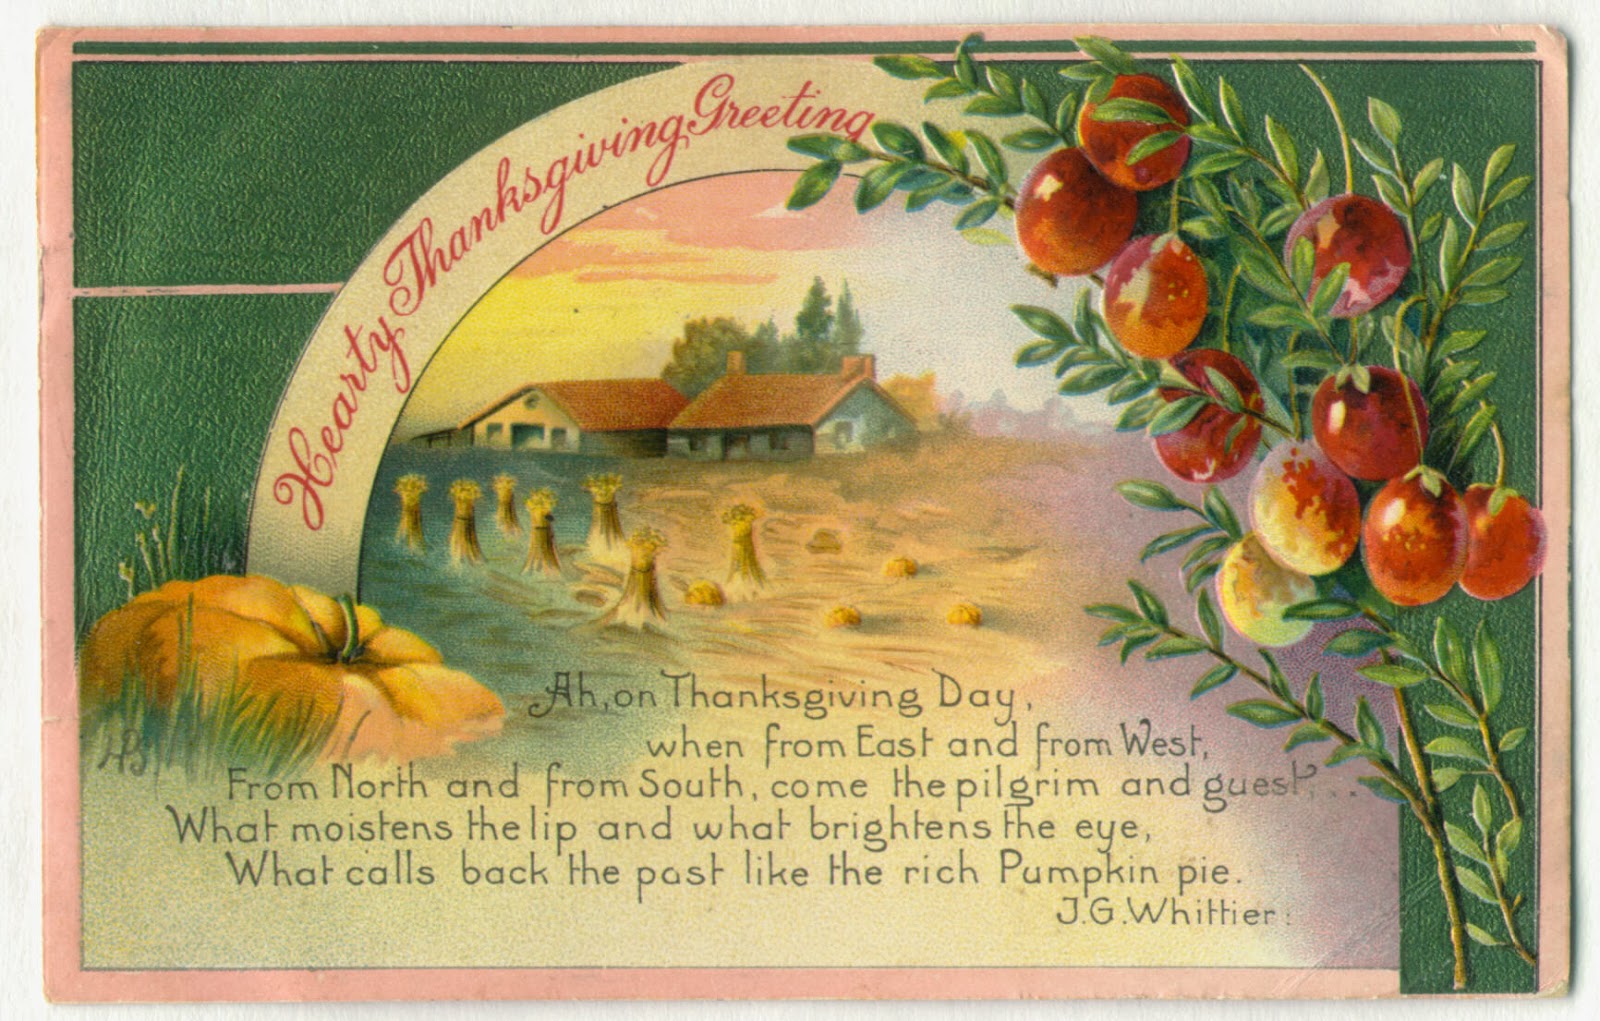 Some Vintage Thanksgiving Images.